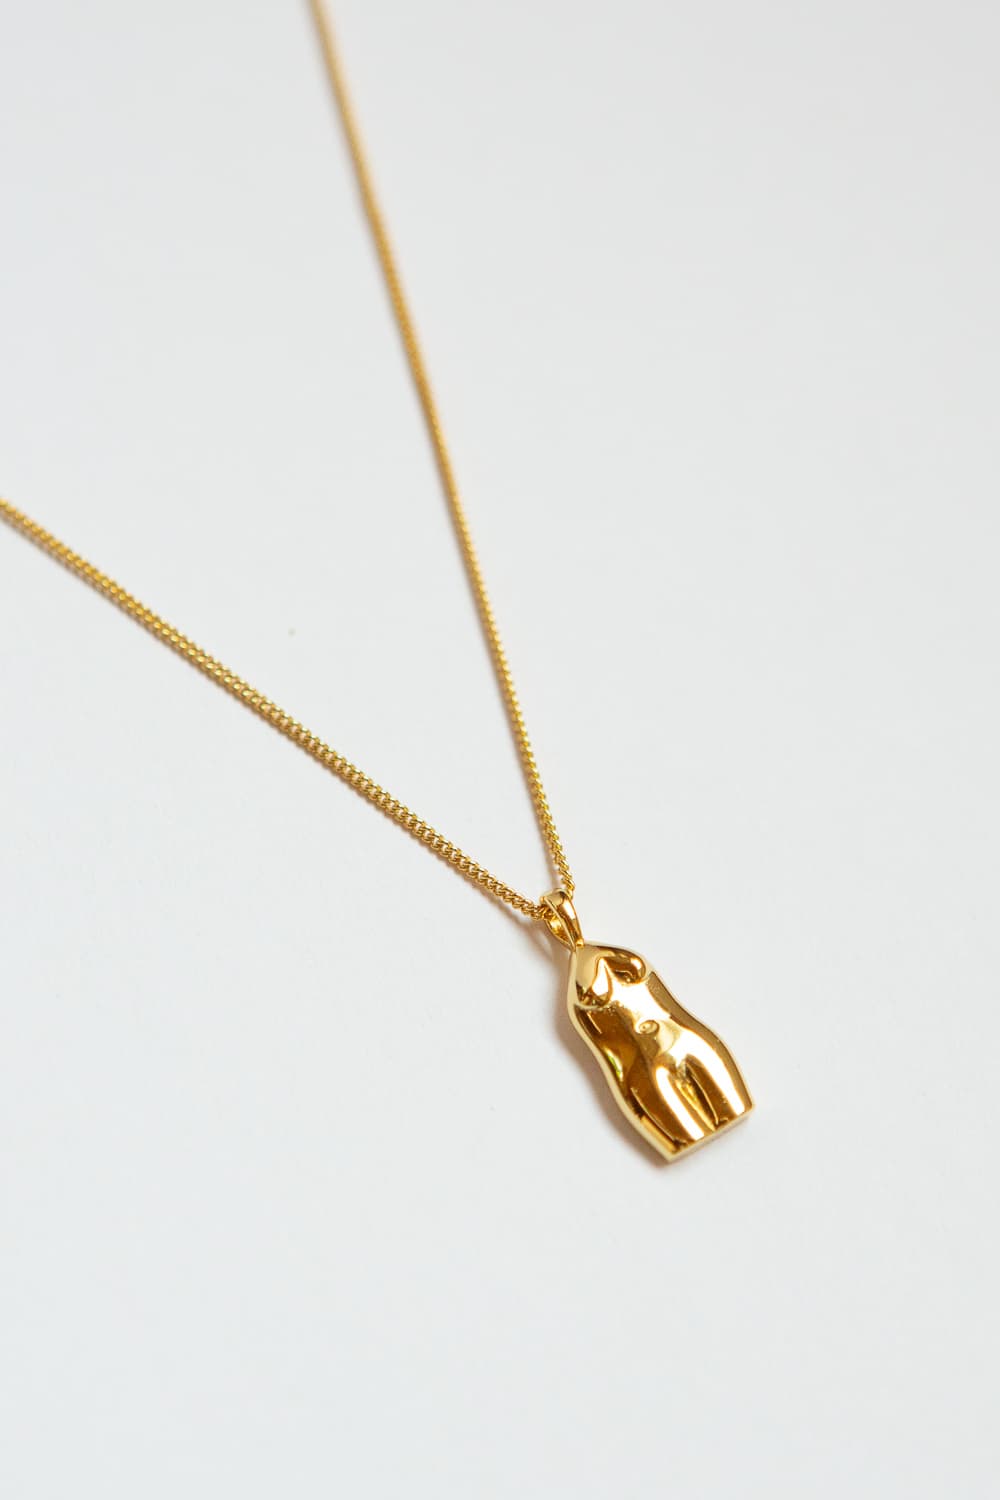 Gold Woman Body Pendant Necklace 925 Sterling Silver